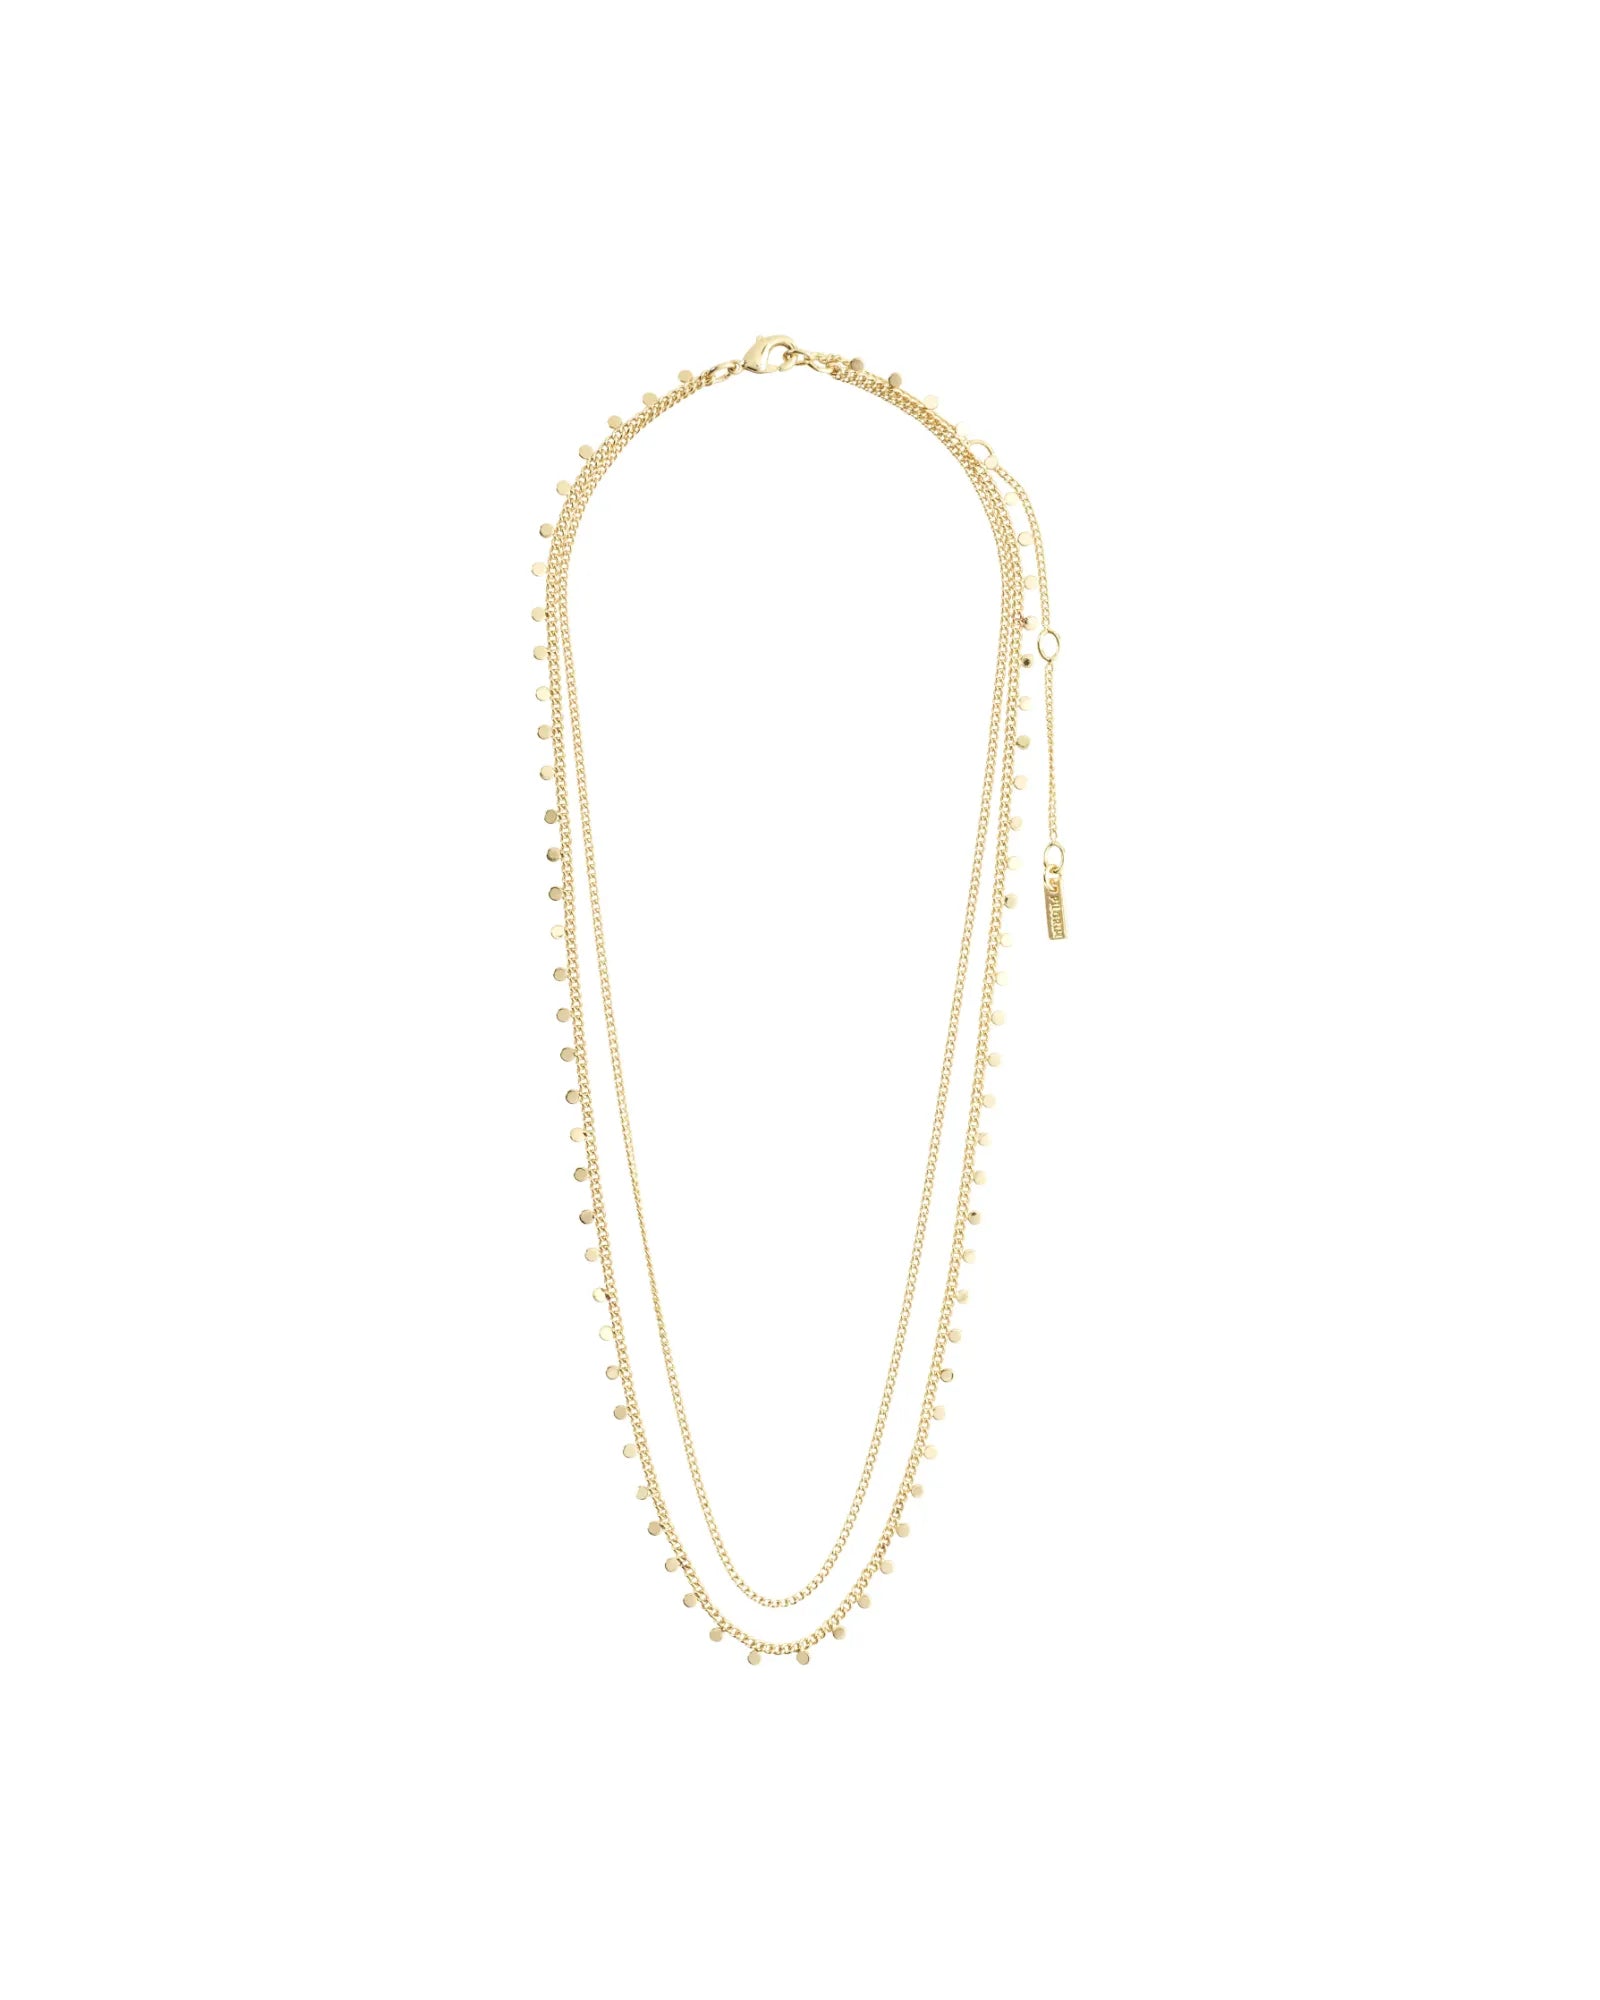 BLOOM Recycled Necklace 2-in-1 - Gold Plated